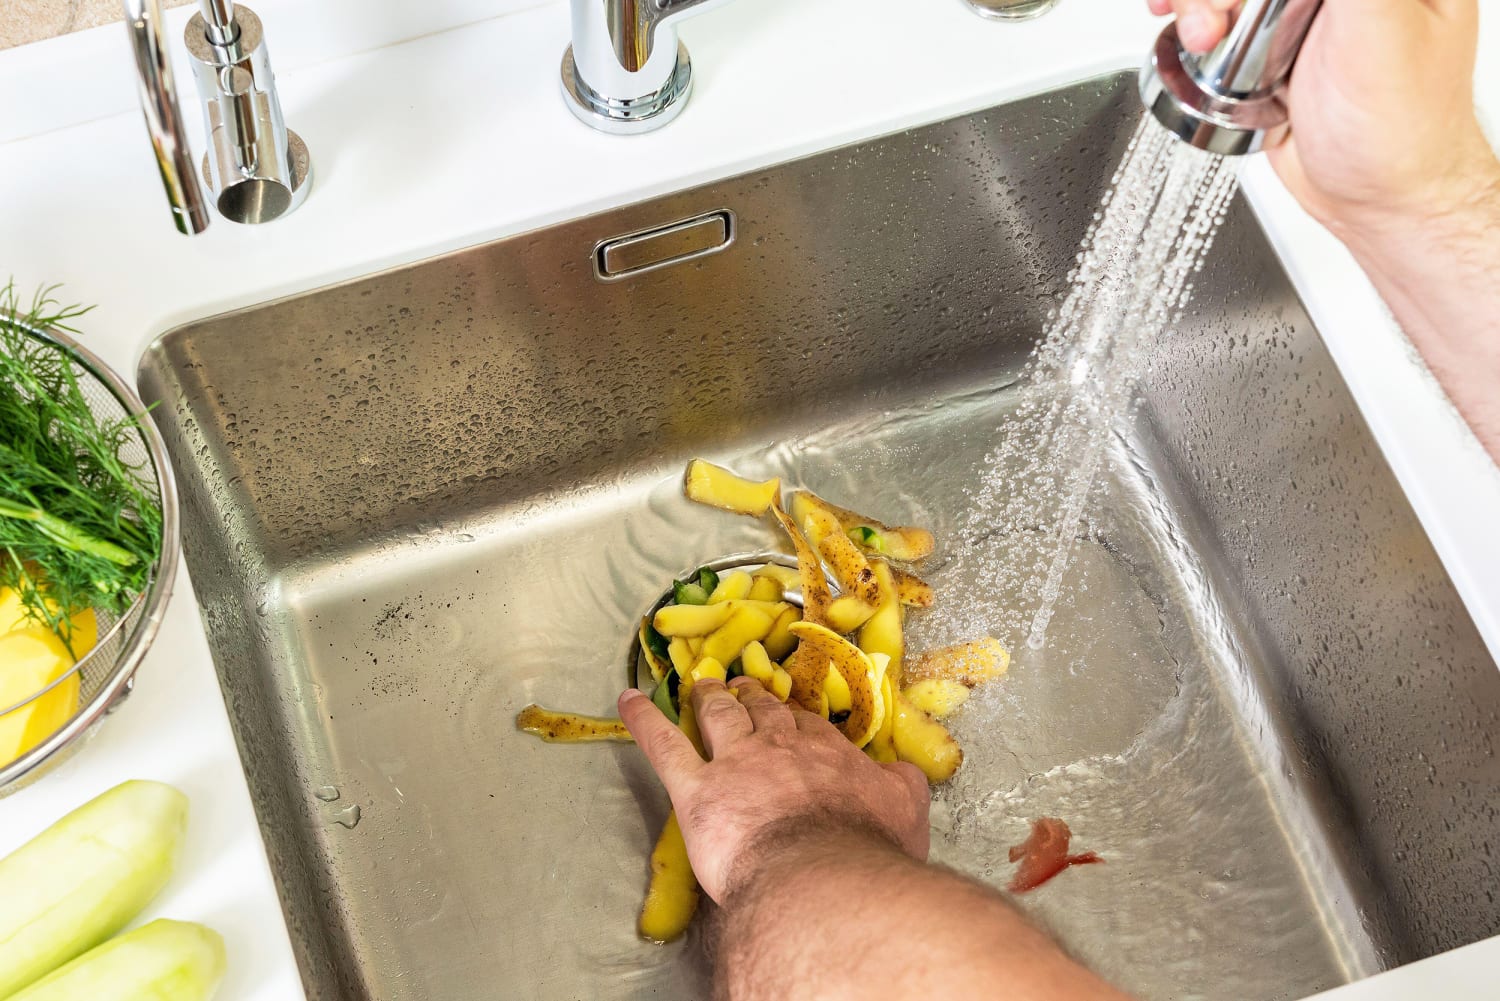 11 Things You Should Never Put Down The Garbage Disposal